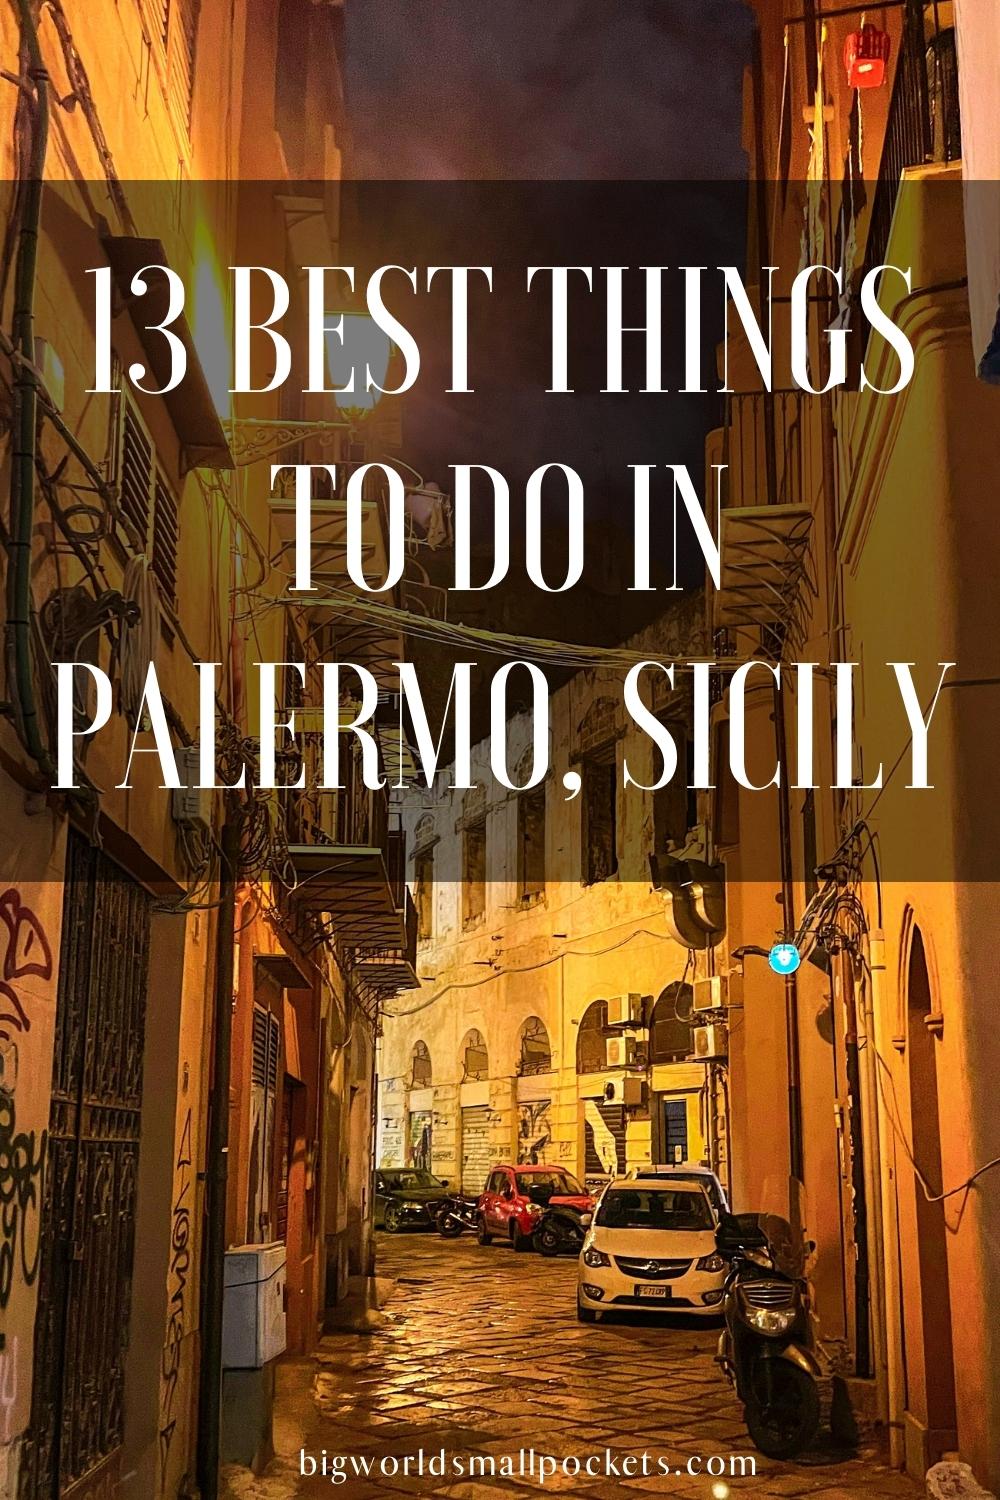 Top 13 Things to Do in Palermo, Sicily